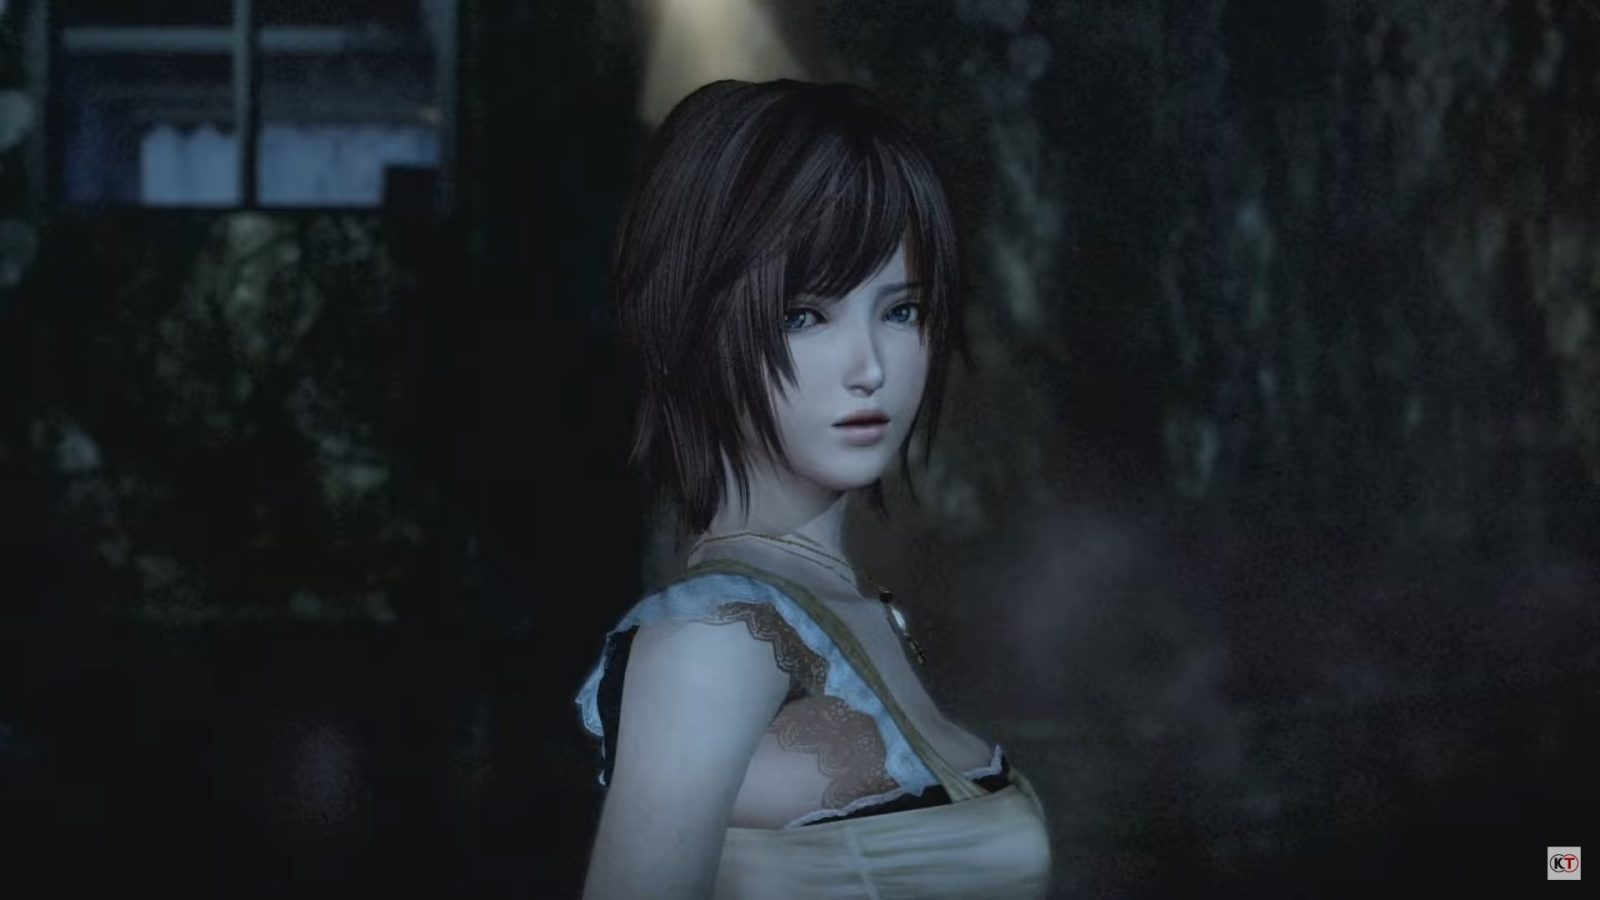 FATAL FRAME: Mask of the Lunar Eclipse digital pre-orders are now available